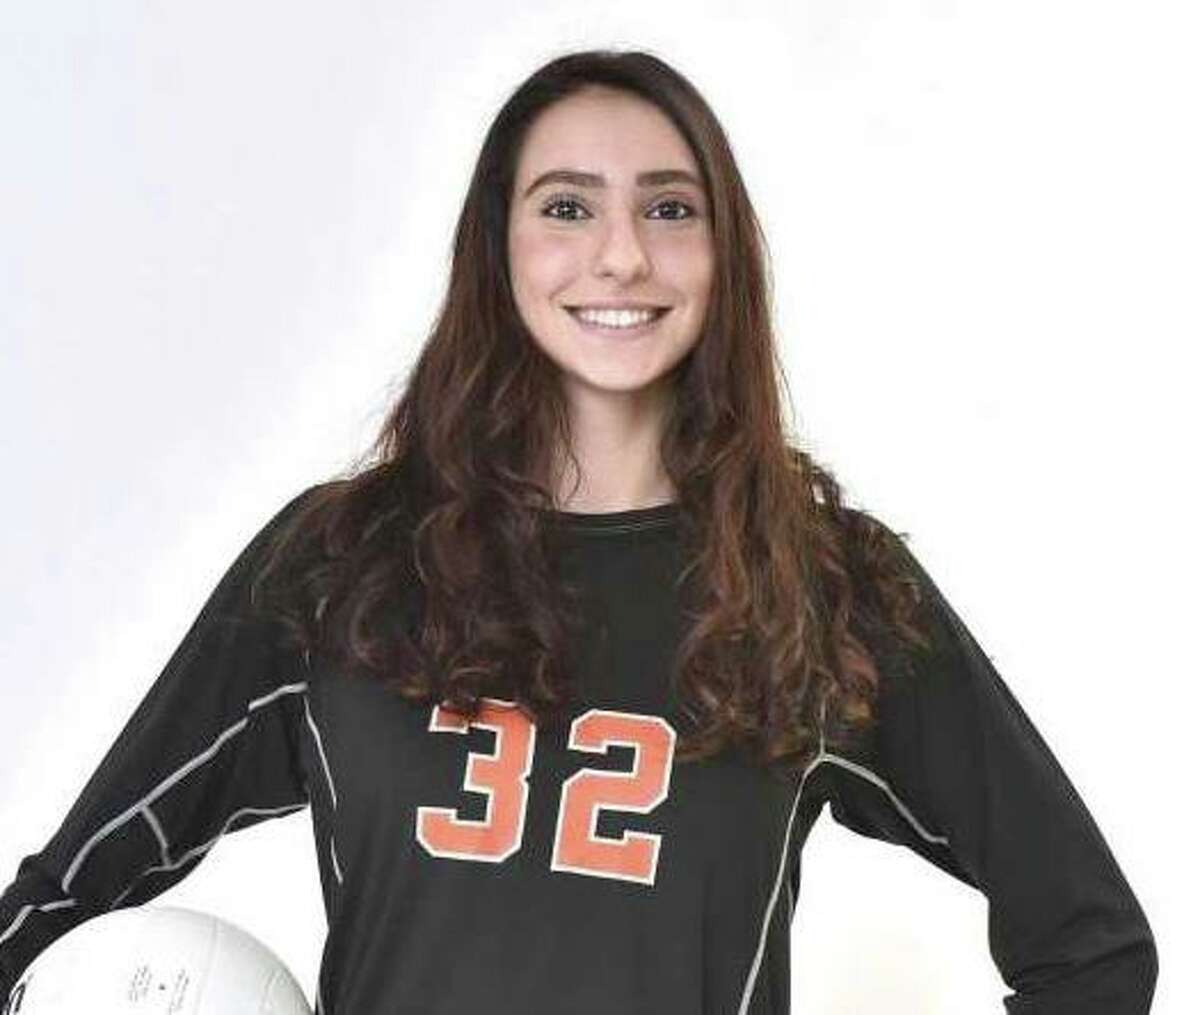 Reem Abdel-Hack had six kills and six aces in the win over Hillhouse.